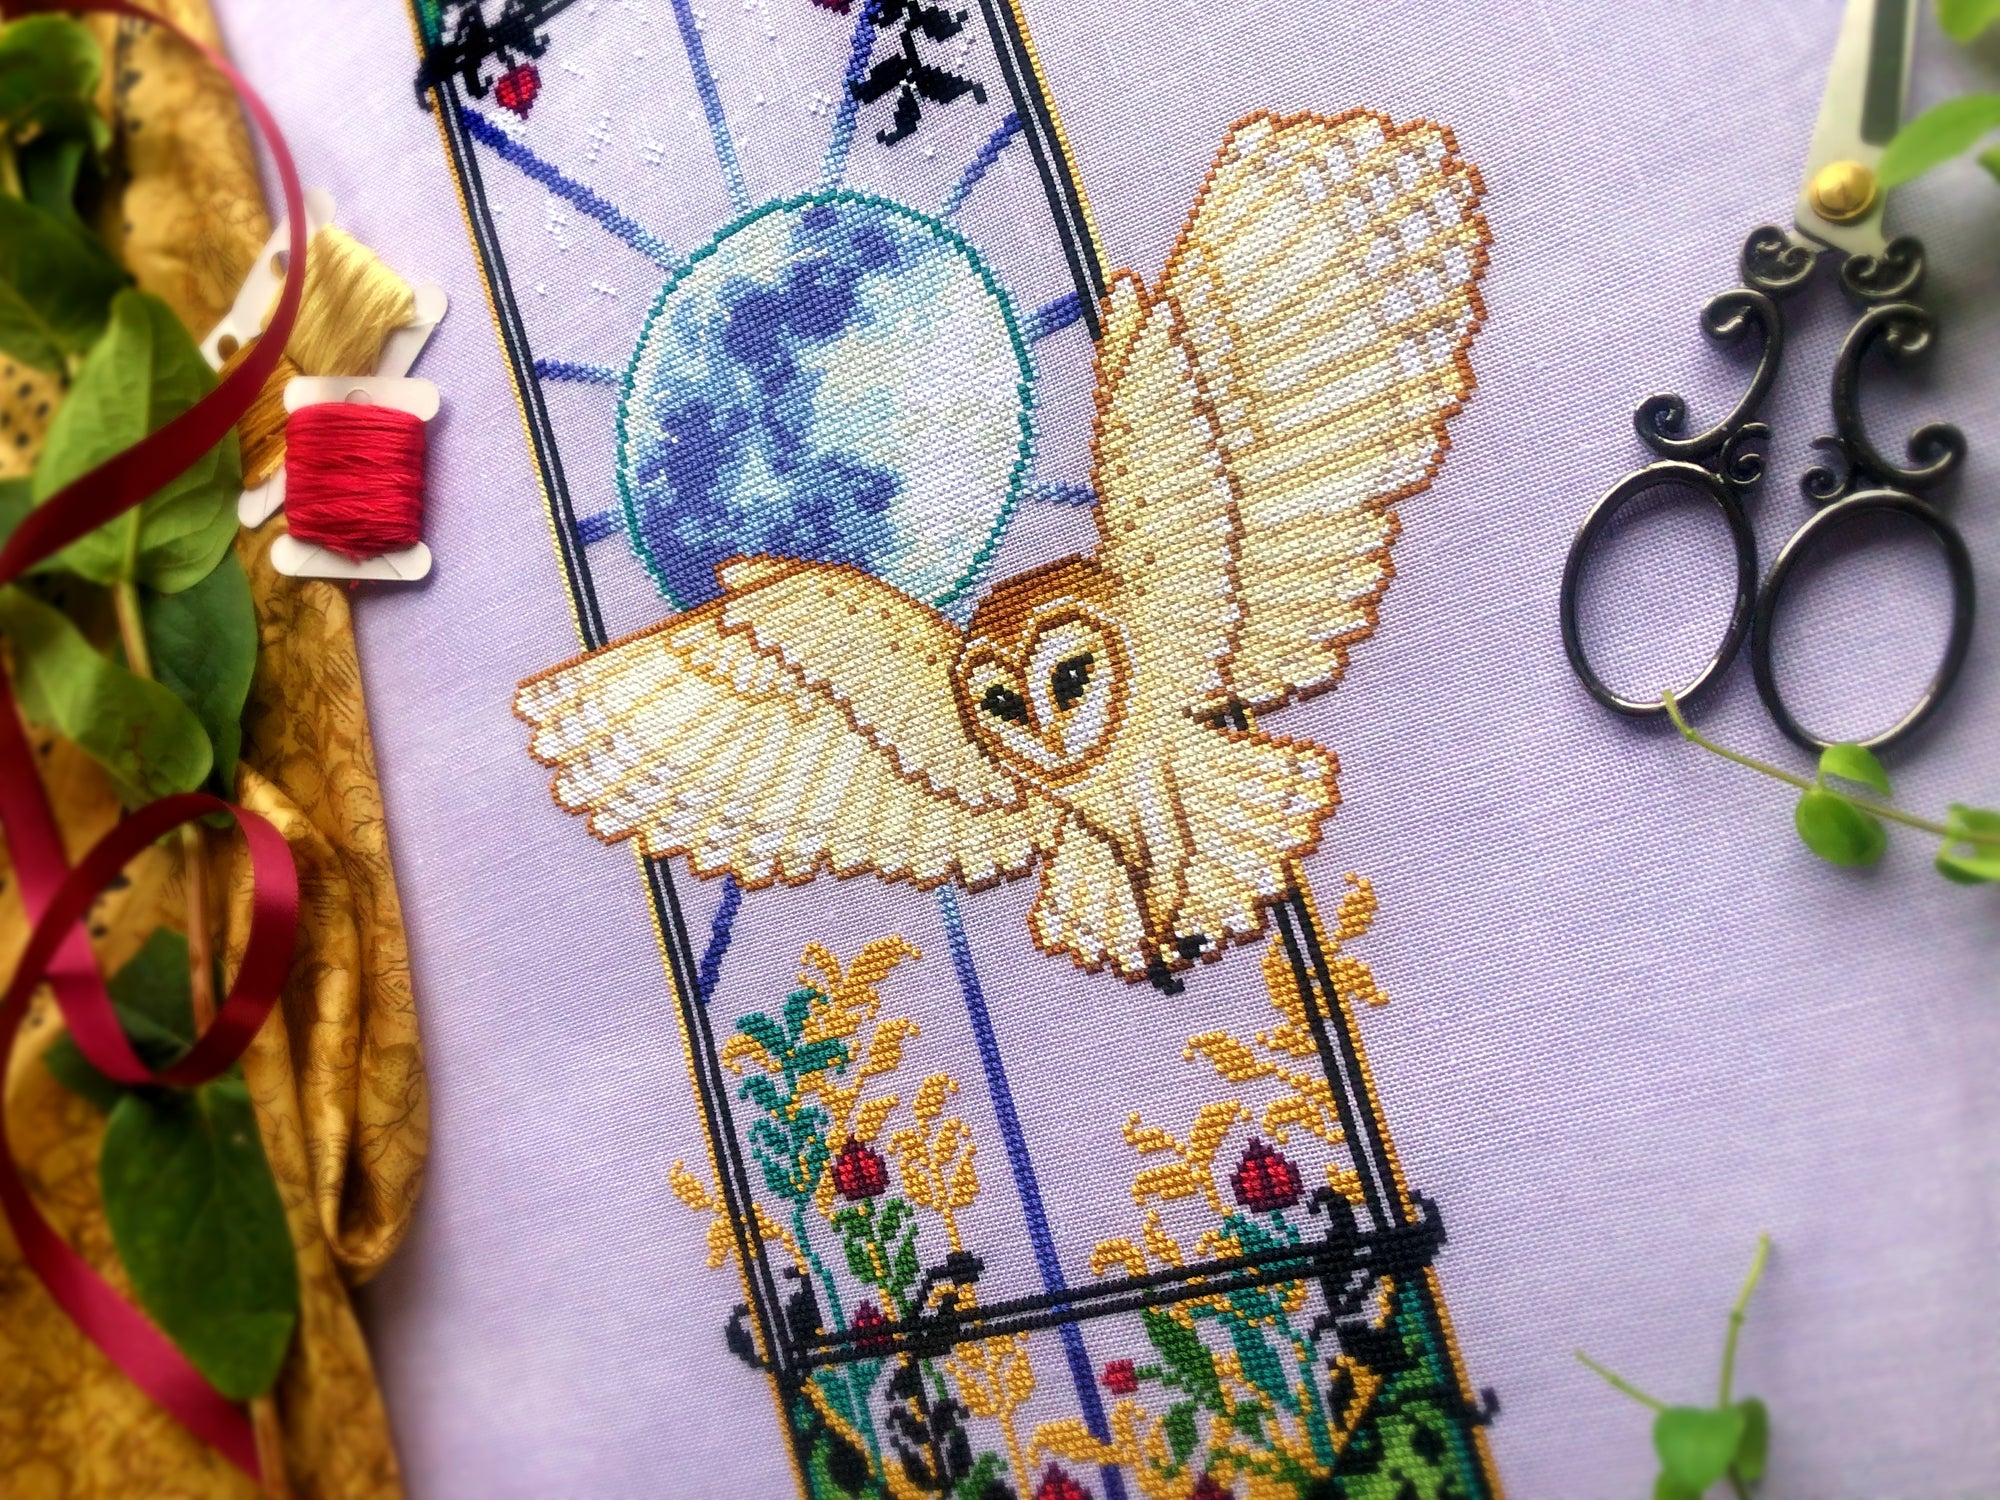 Closeup of barn owl, righthand side. Owl is white and beige, with brown, black and grey details. The wings are clearly defined with visible feathers. Its face is distinct. Behind it is an enormous moon with clear moon landscape detailing.